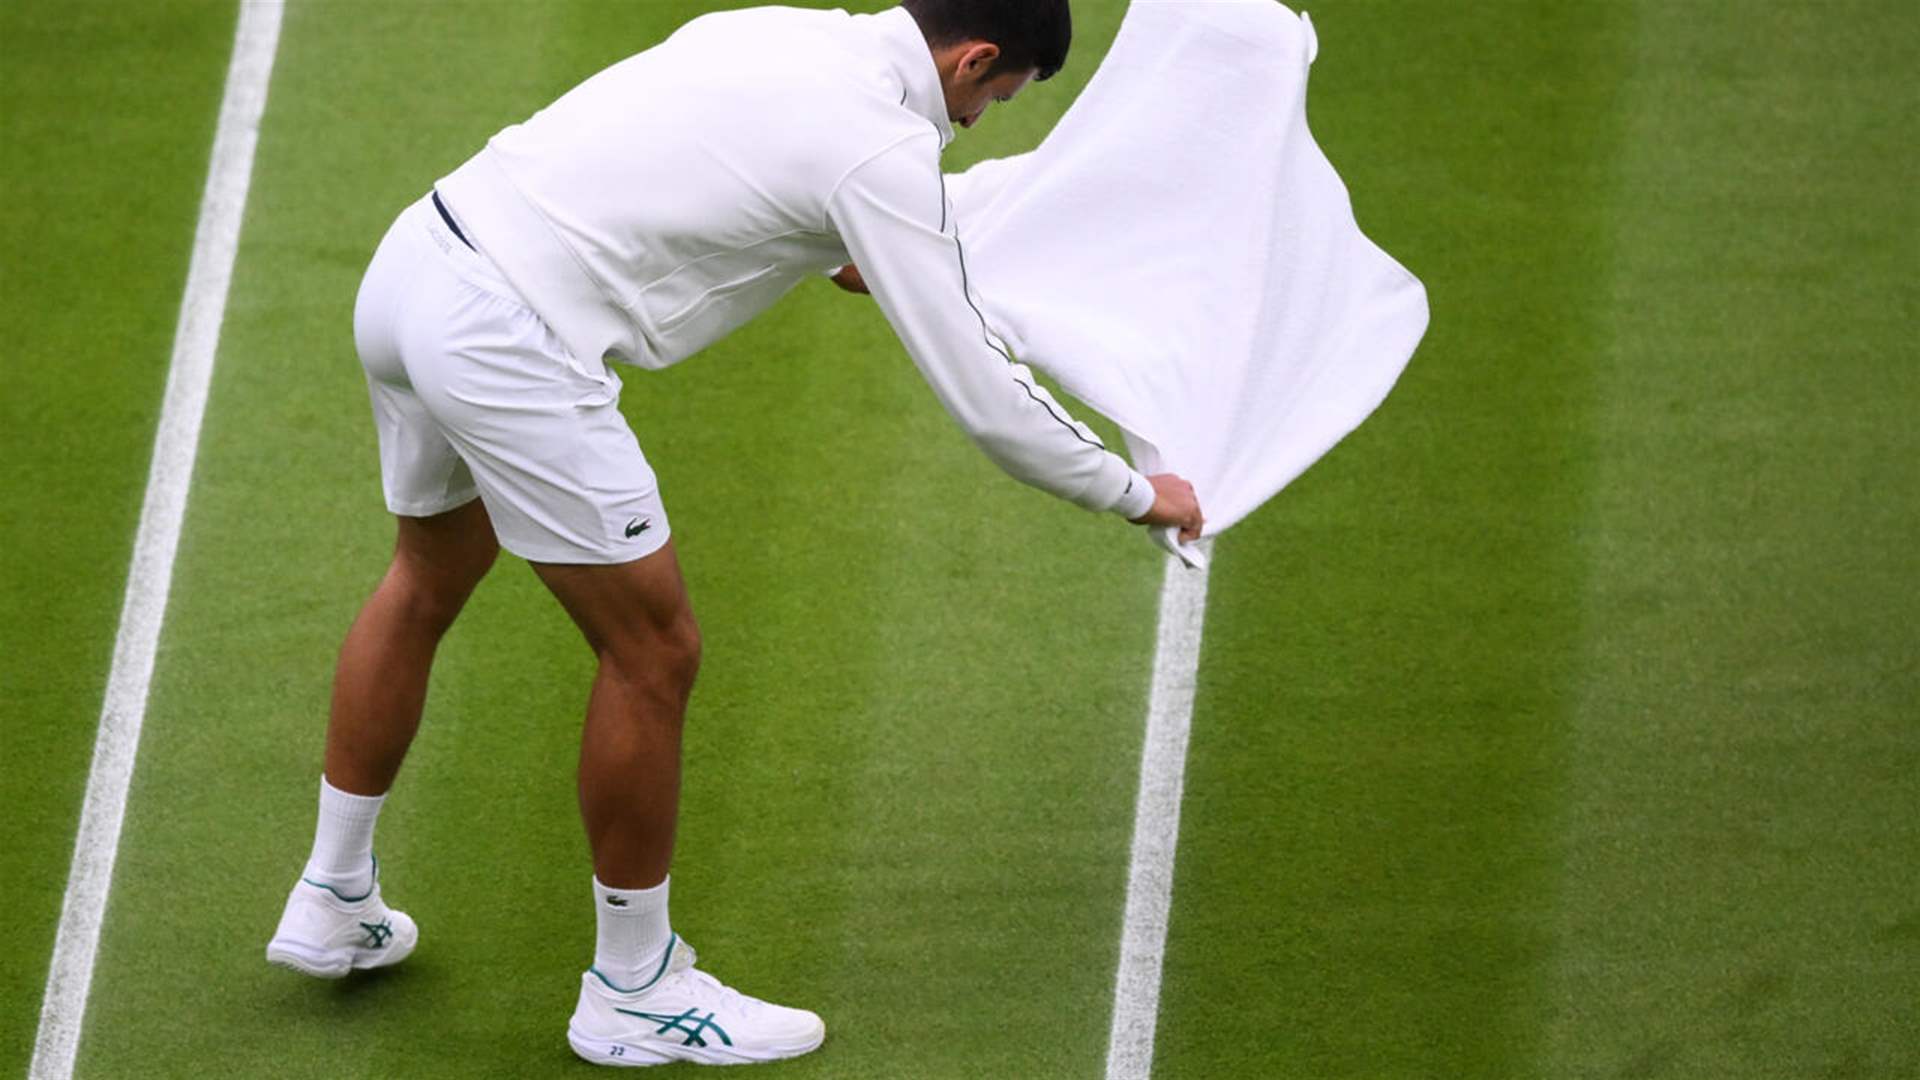 Djokovic dries Wimbledon court before wiping floor with opponent